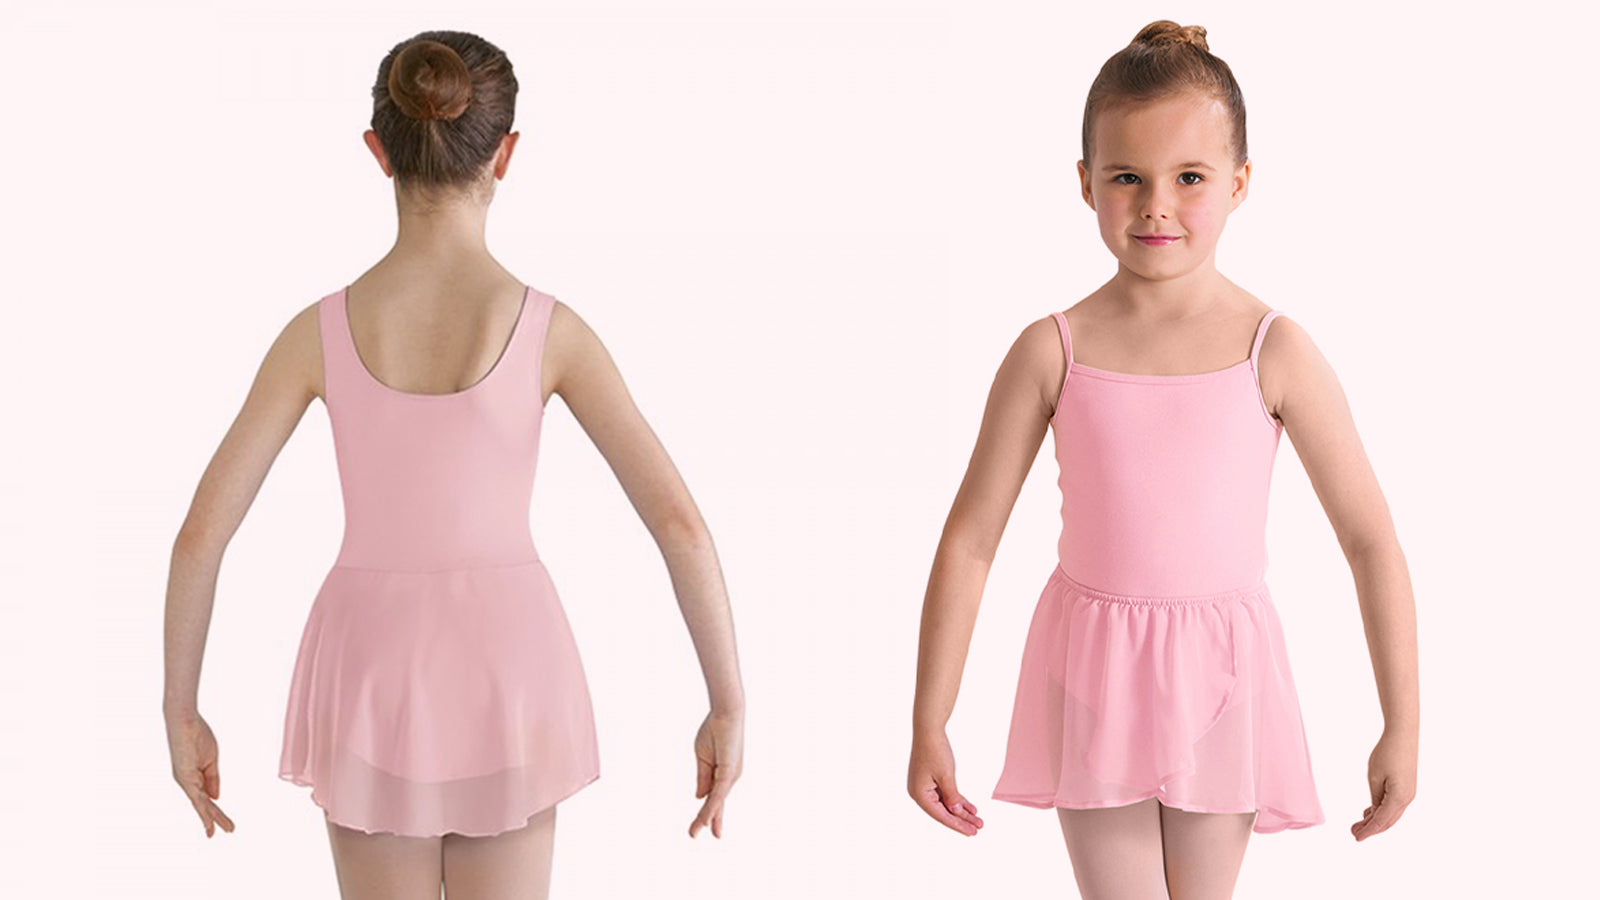 A front and back view of a young dancer wearing a pink skirted BLOCH leotard